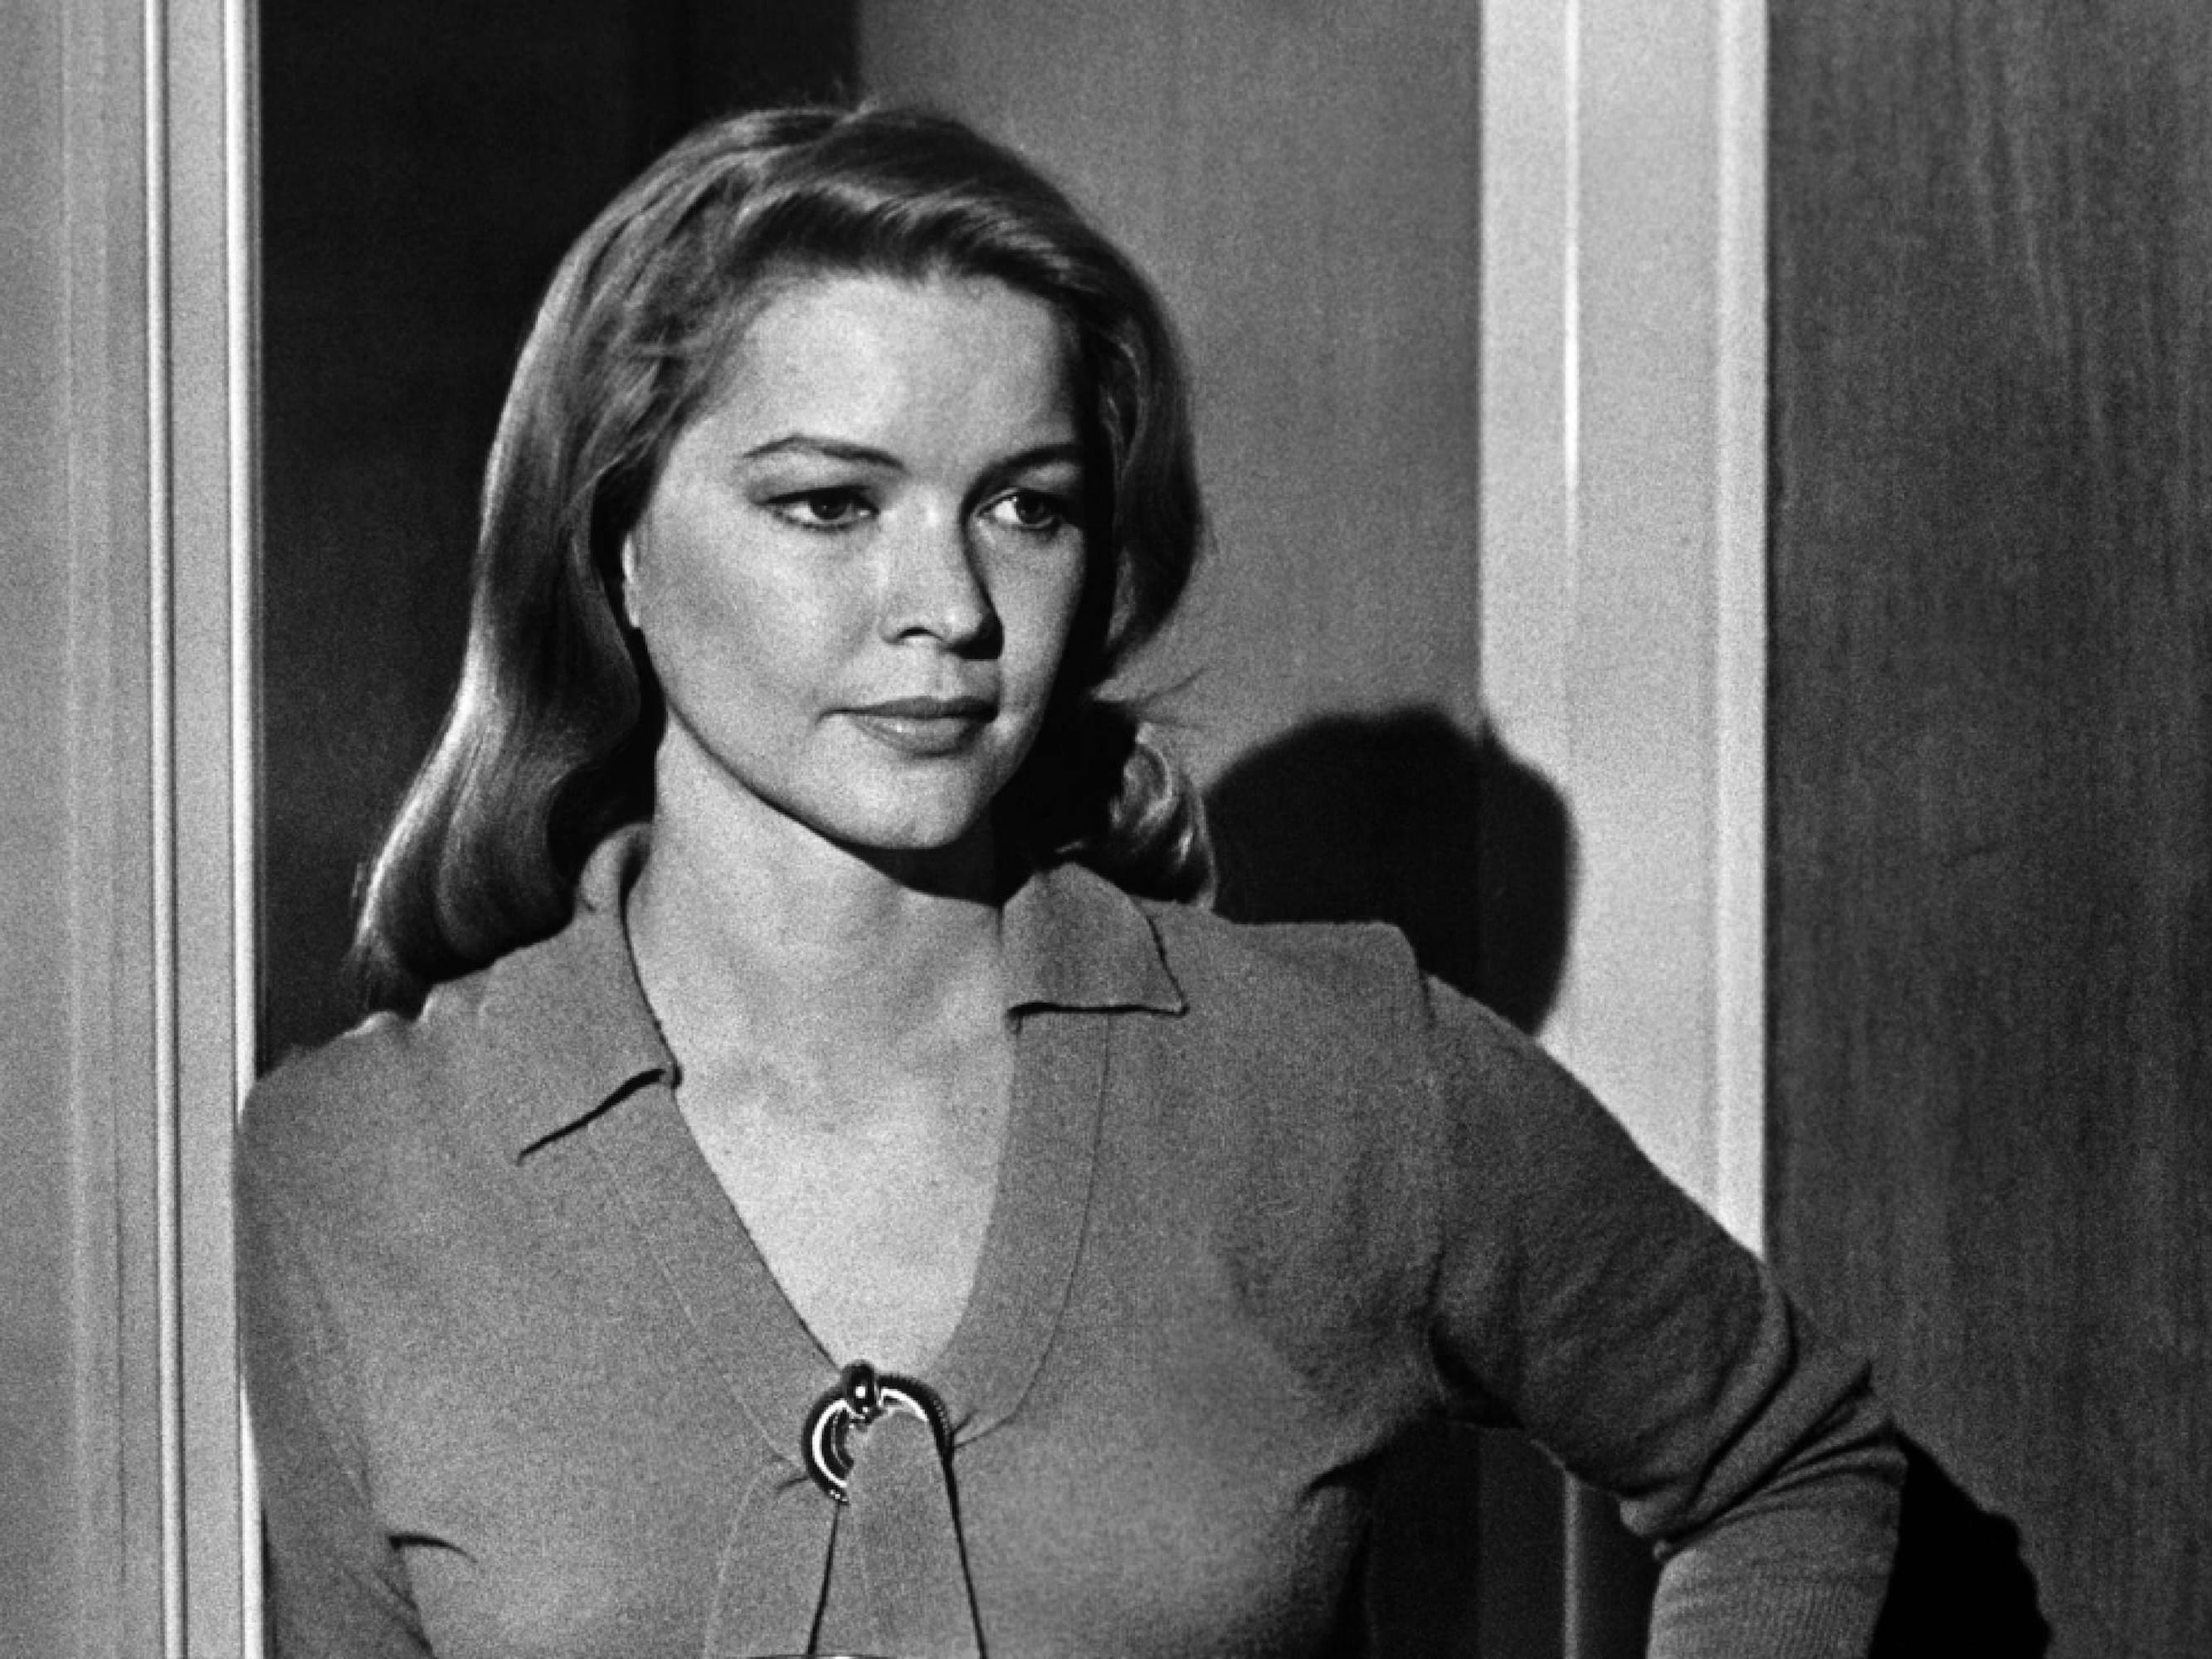 Ellen Burstyn as Lois Farrow in a still from The Last Picture Show. Burstyn was in her 30s when this film was shot. Here she appears posed in a doorway, hand on her hip. 